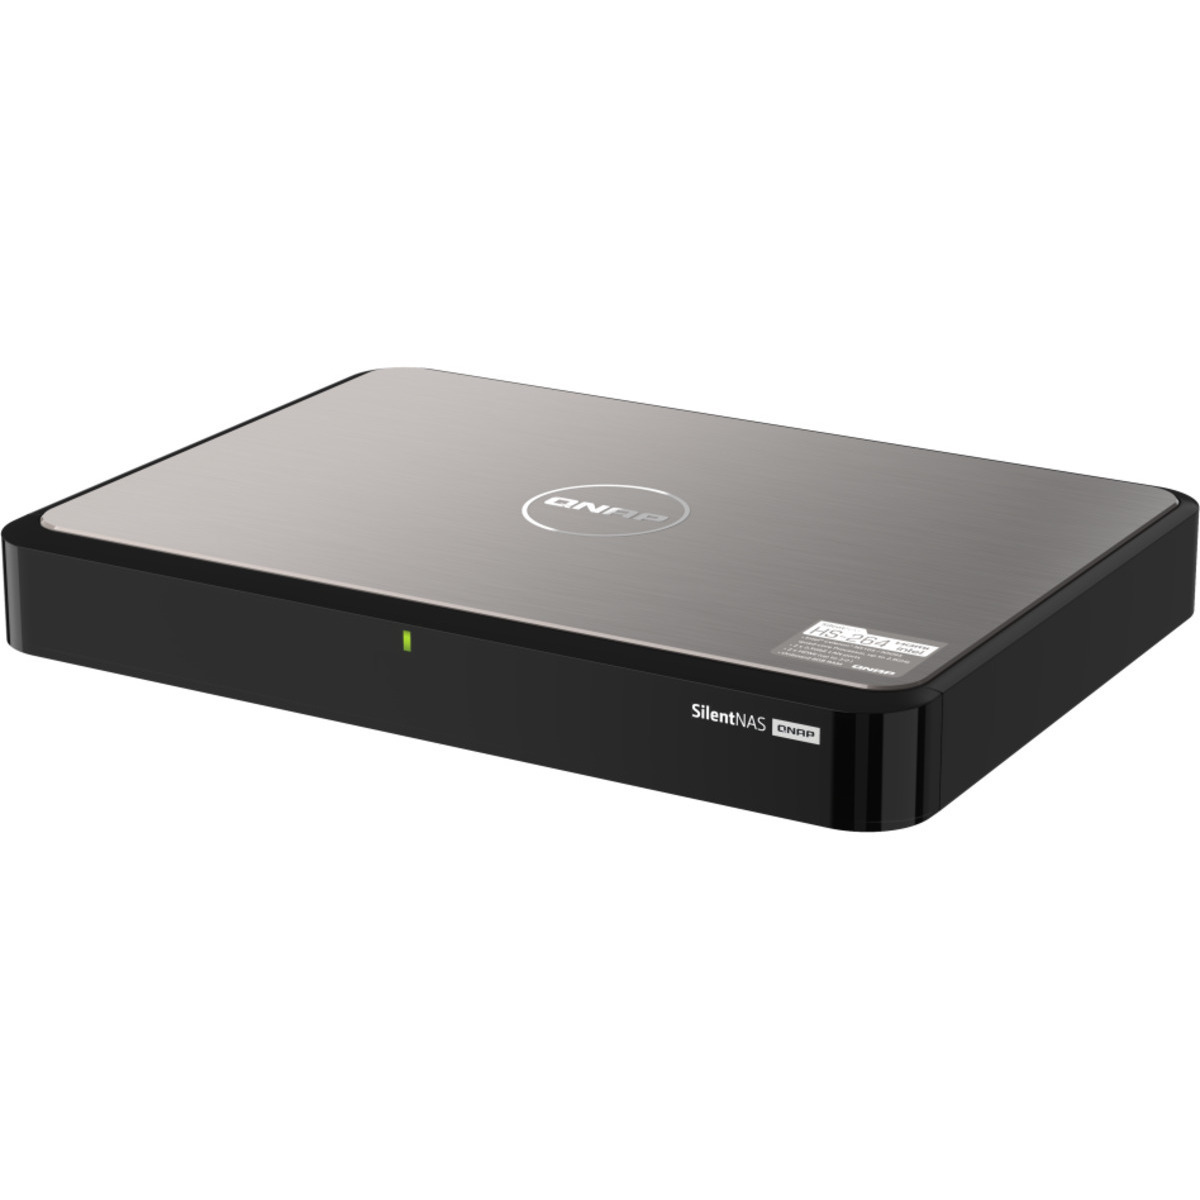 QNAP HS-264 2tb 2-Bay Desktop Multimedia / Power User / Business NAS - Network Attached Storage Device 1x2tb Western Digital Red SA500 WDS200T1R0A 2.5 560/530MB/s SATA 6Gb/s SSD NAS Class Drives Installed - Burn-In Tested HS-264